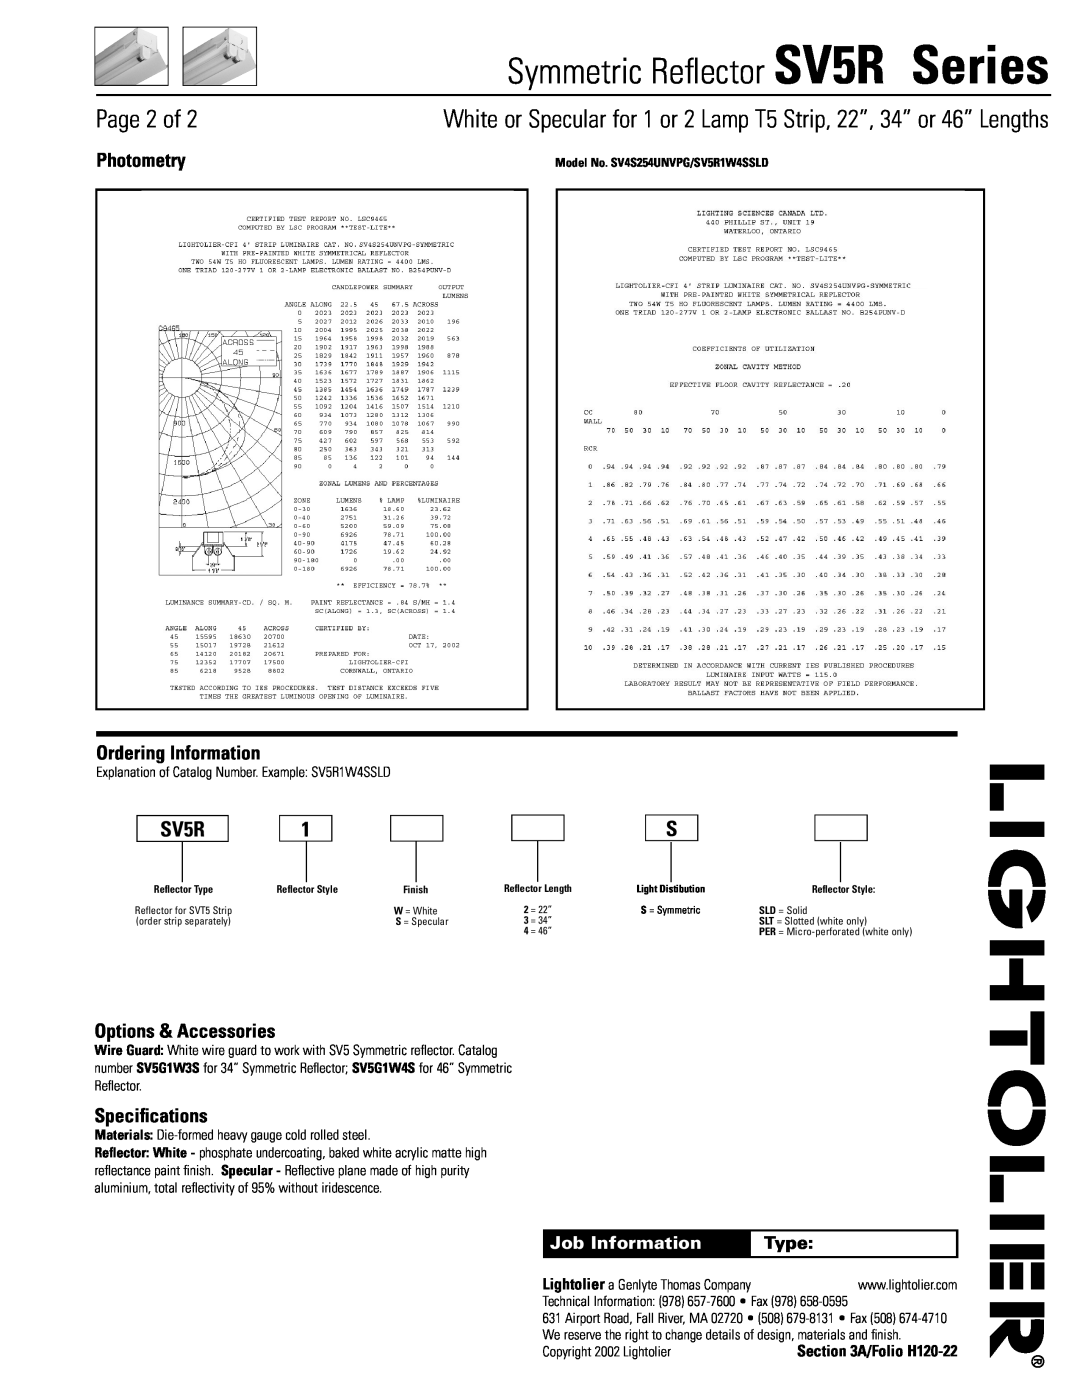 Lightolier SV5R Series Page 2 of, Photometry, Ordering Information, Options & Accessories, Speciﬁcations, Job Information 